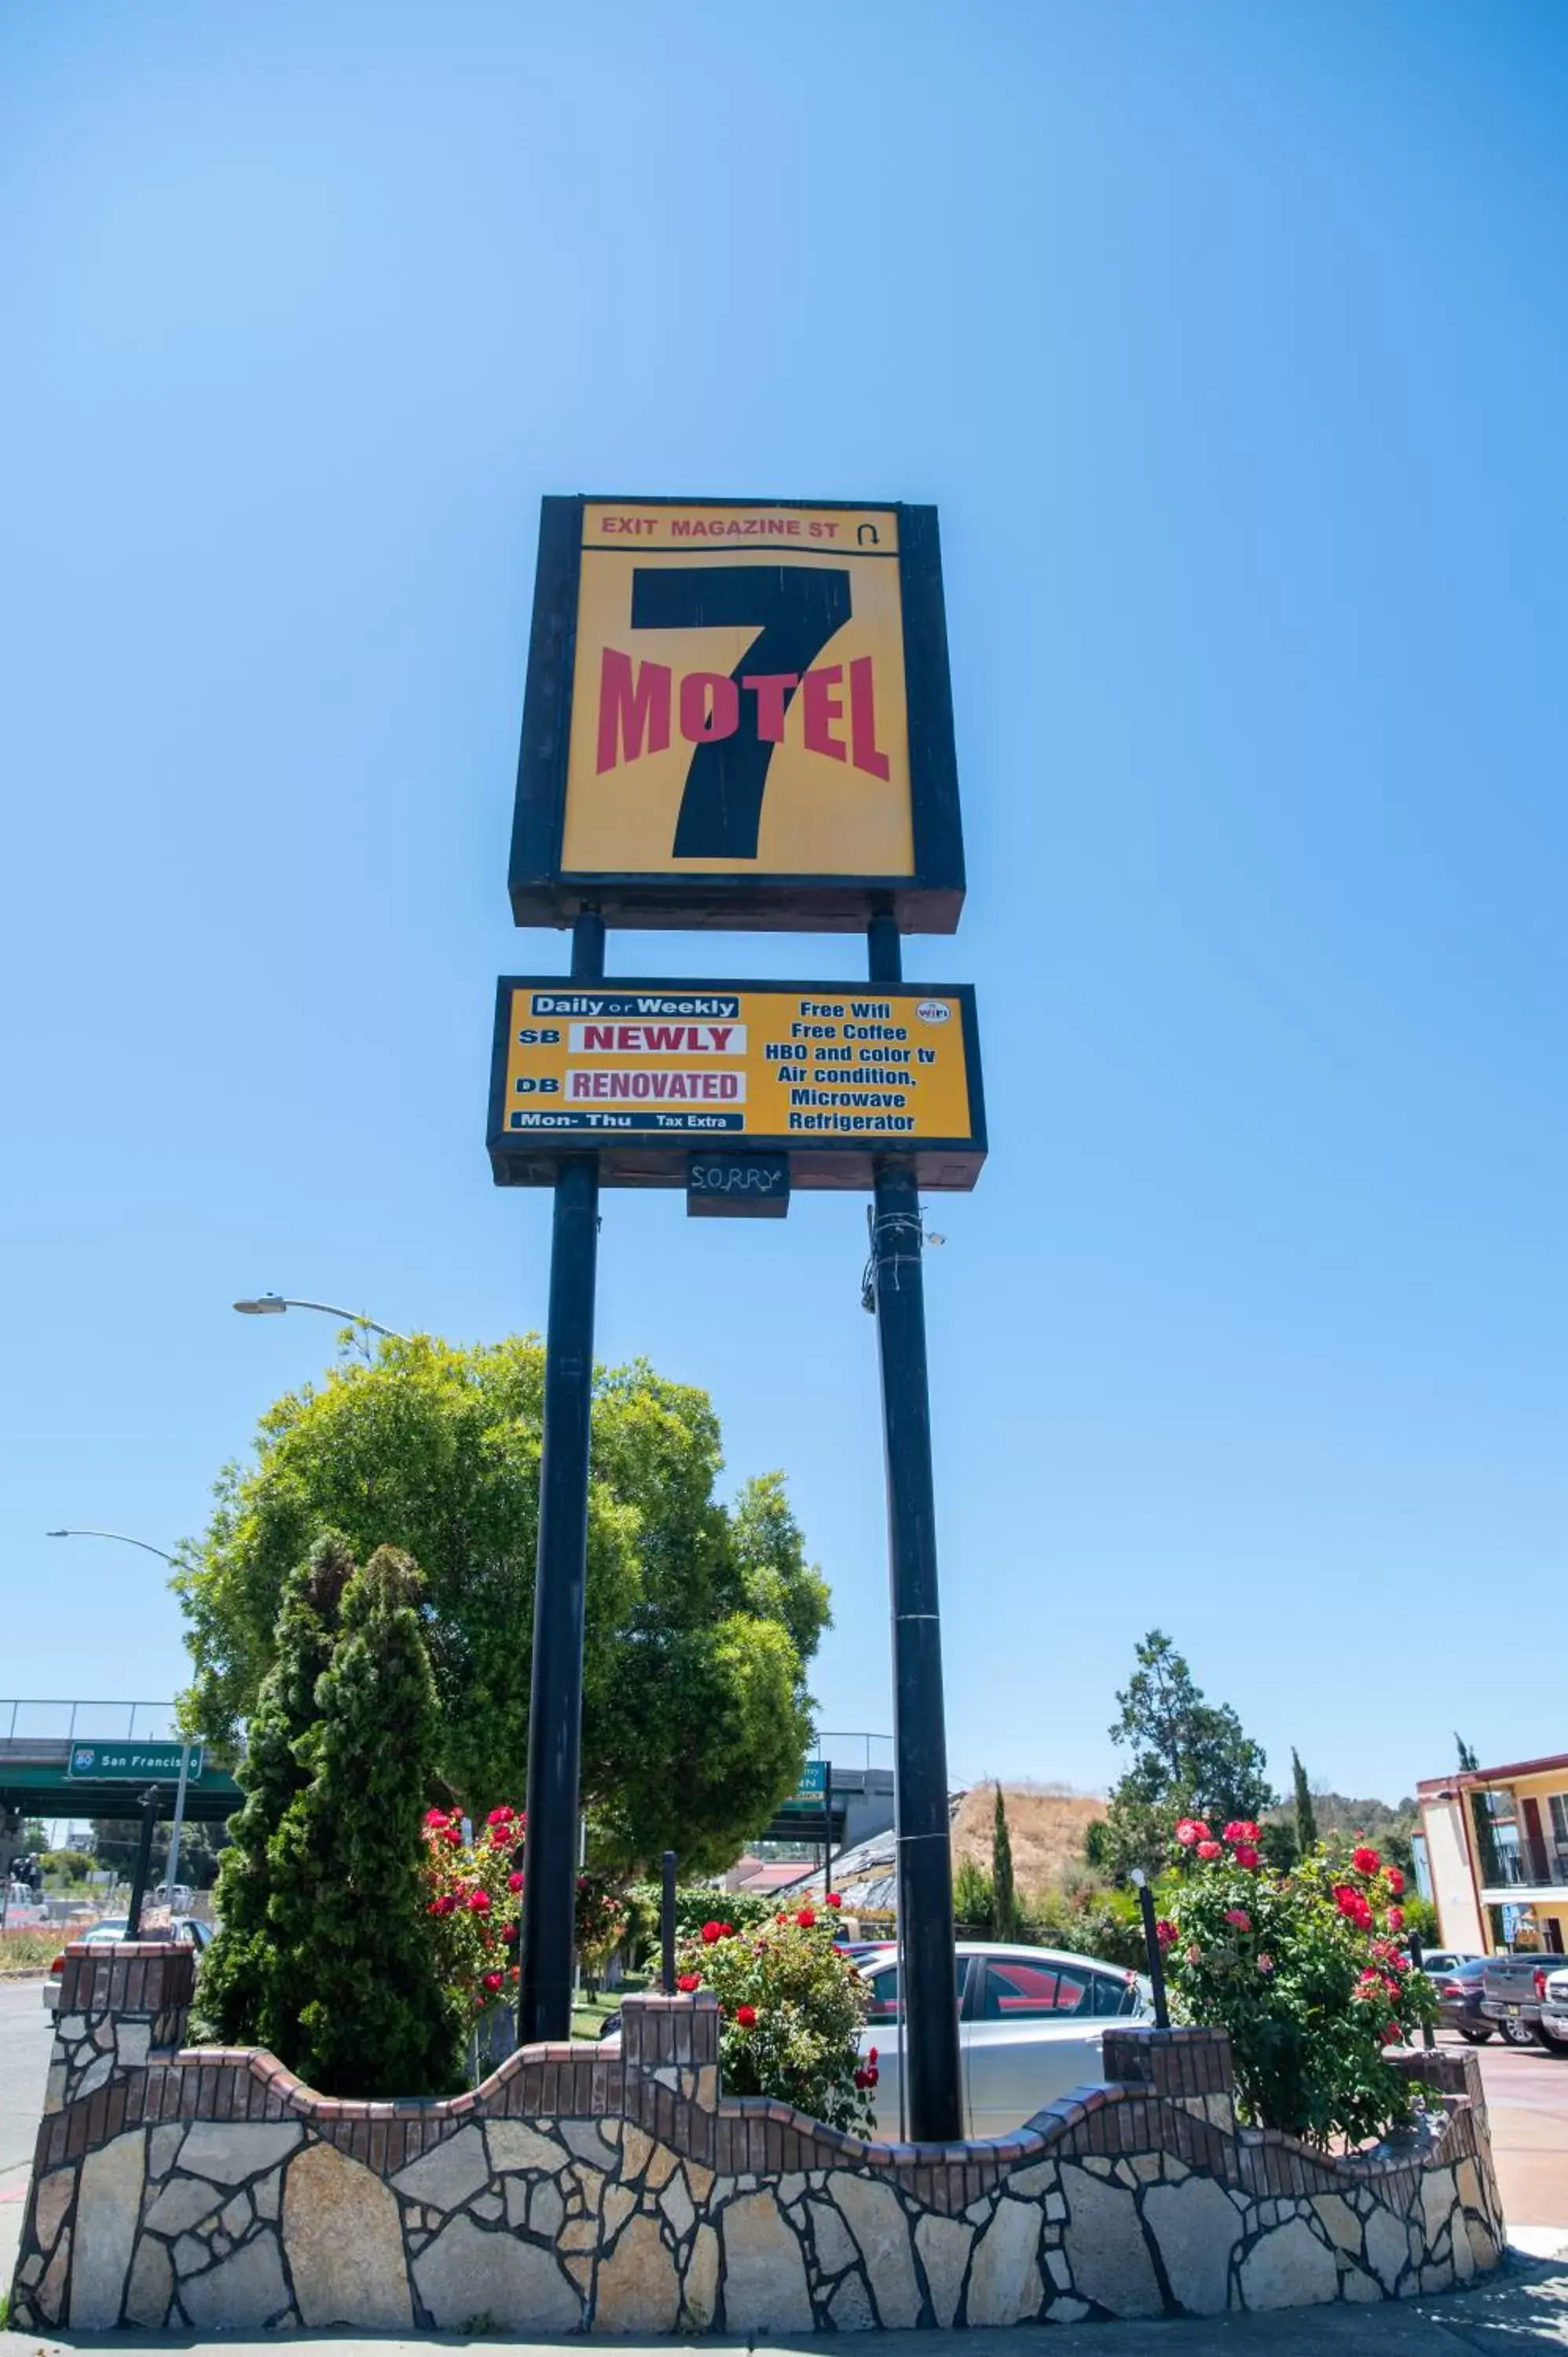 Property building in Motel 7 - Near Six Flags, Vallejo - Napa Valley